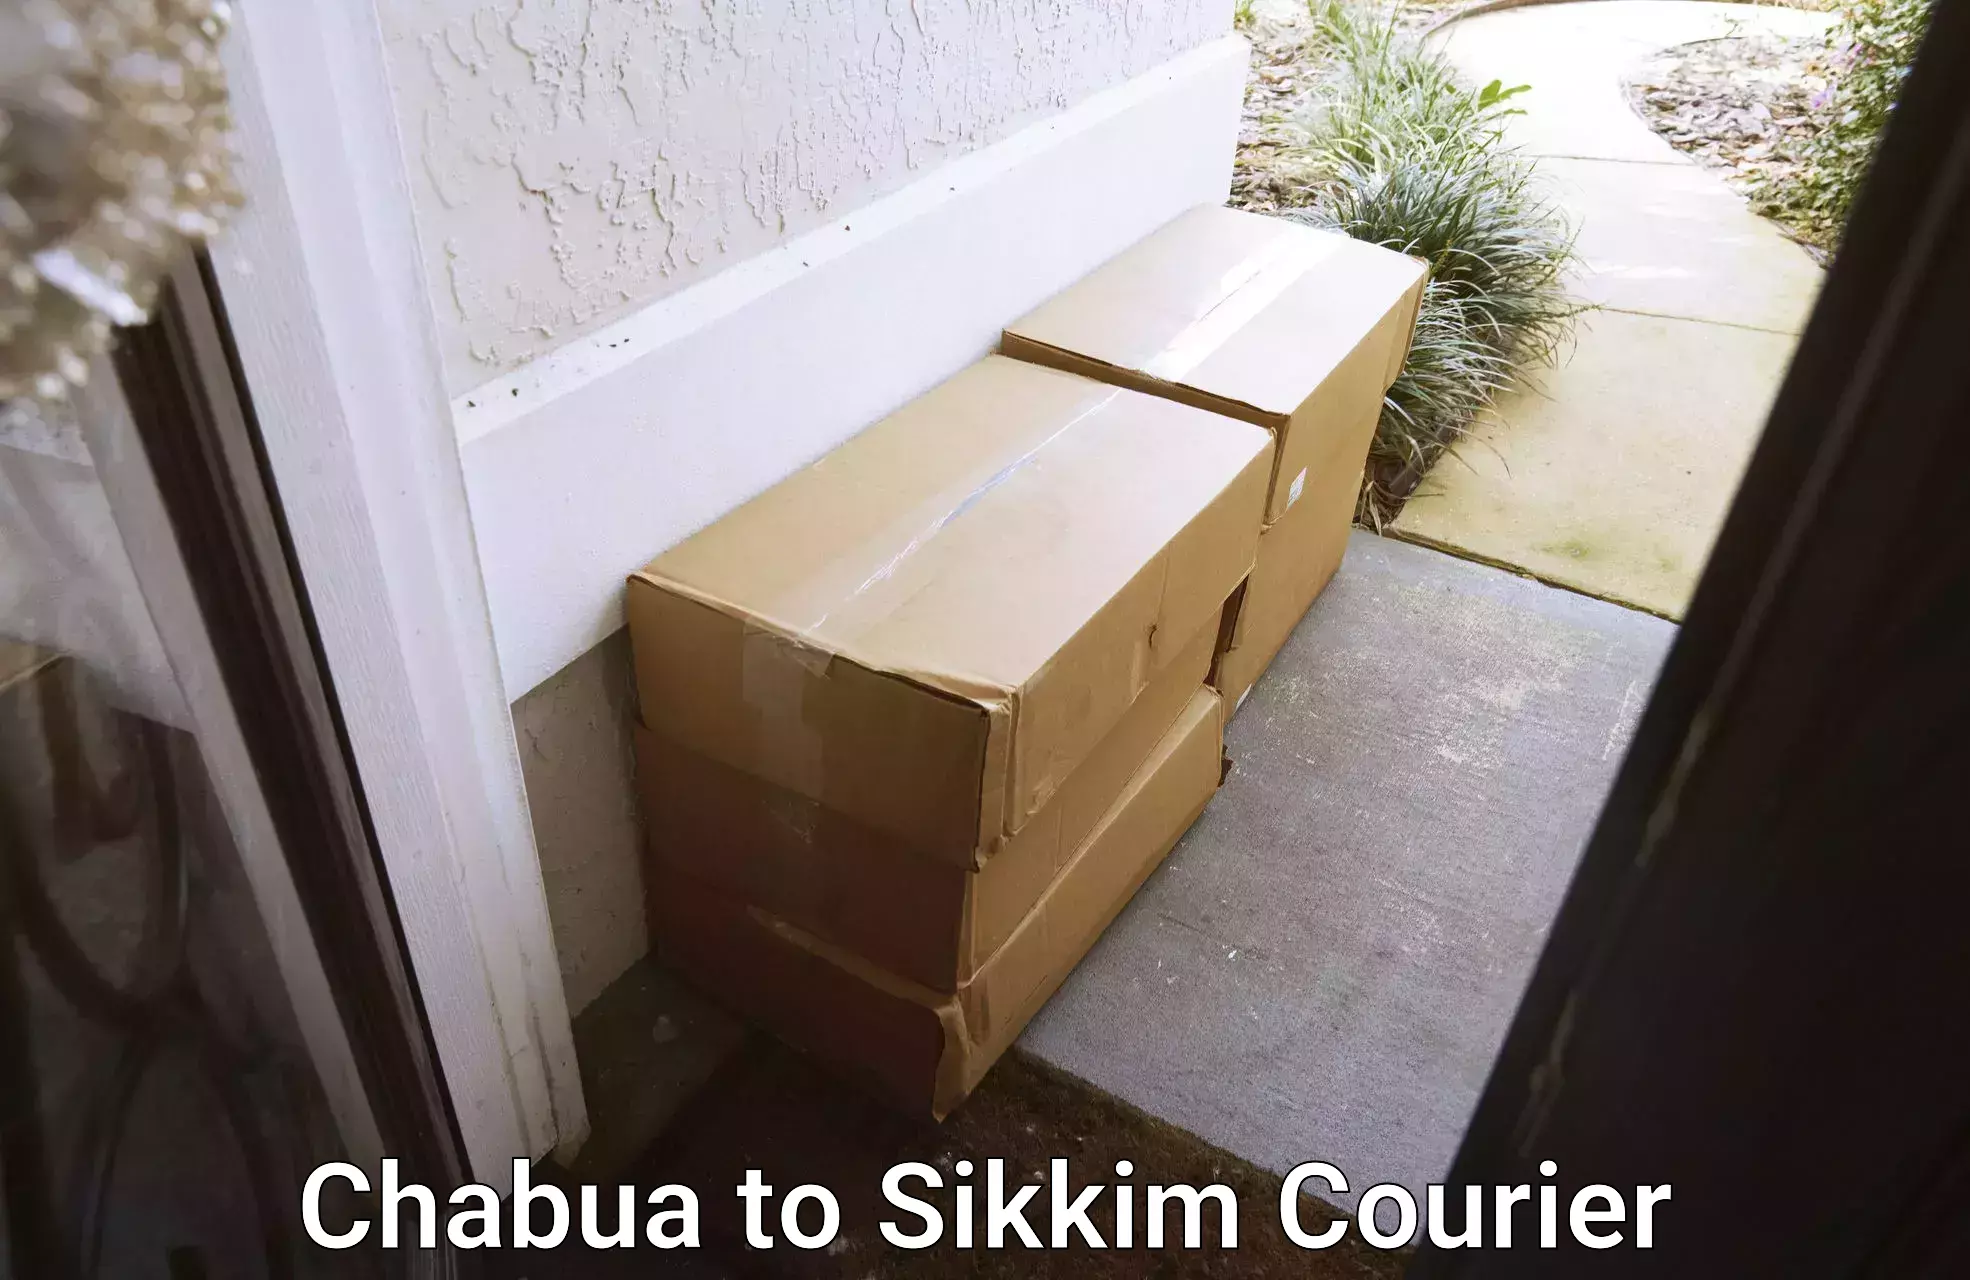 Shipping and handling in Chabua to East Sikkim